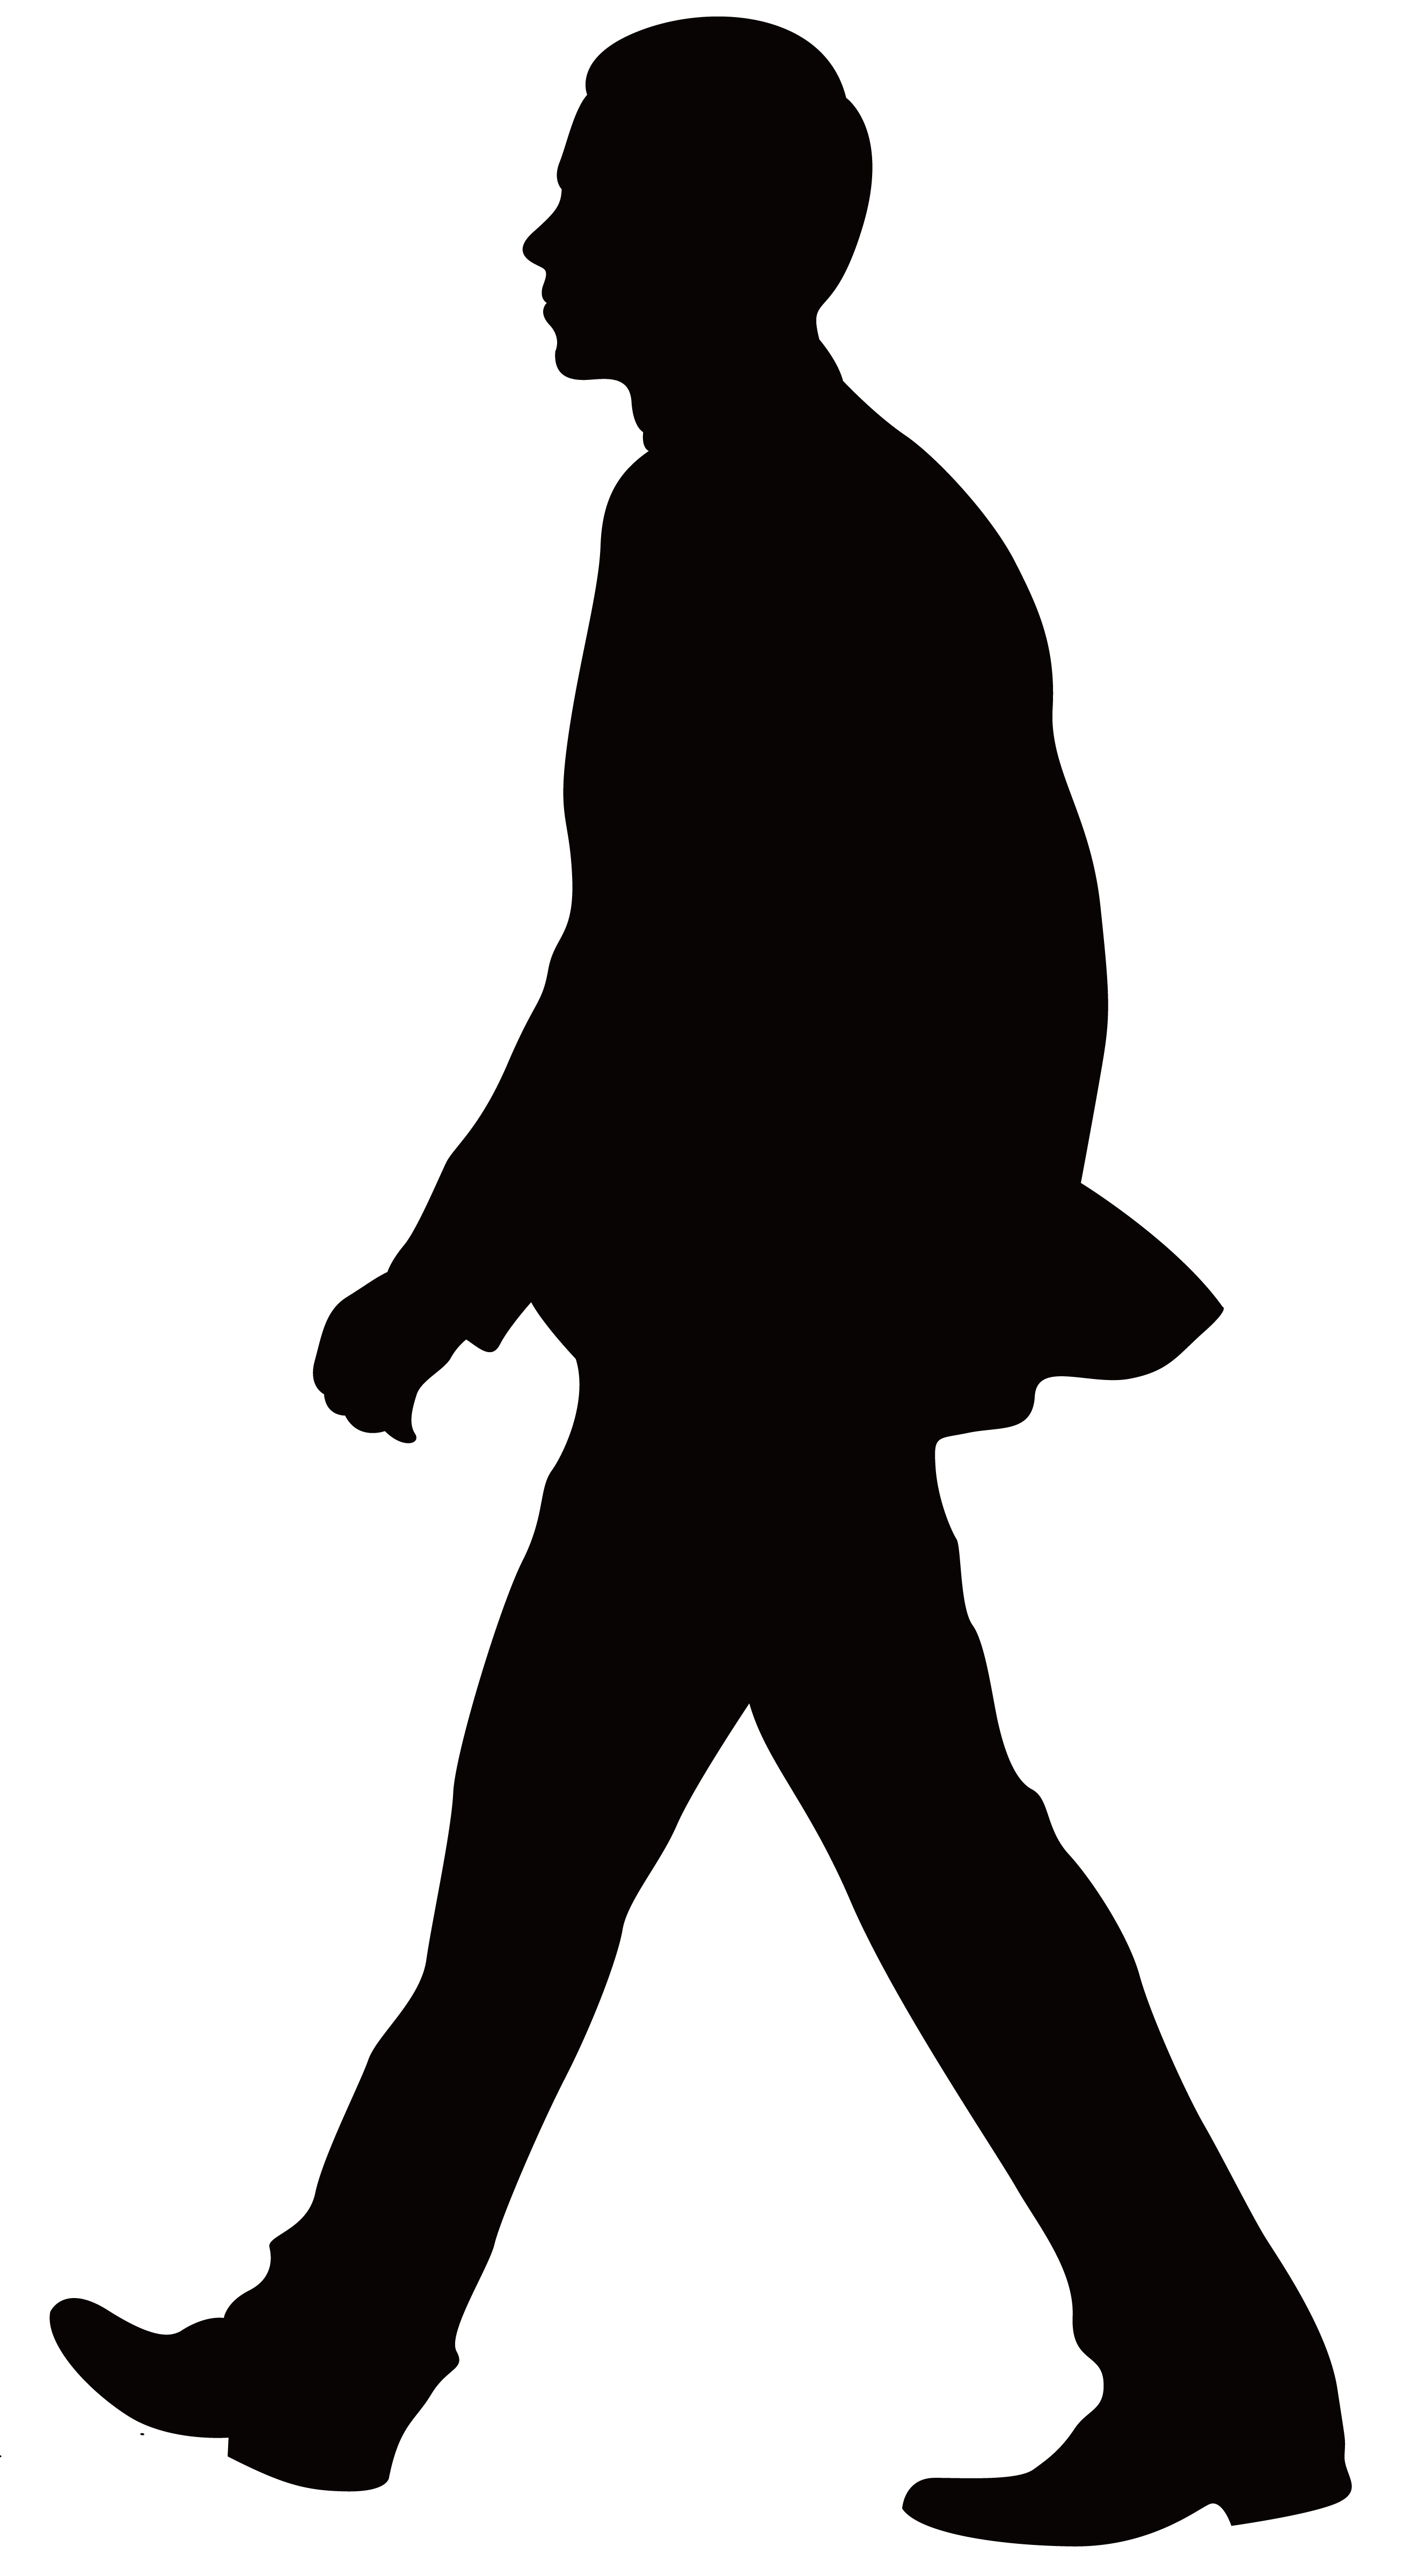 people silhouette architecture png